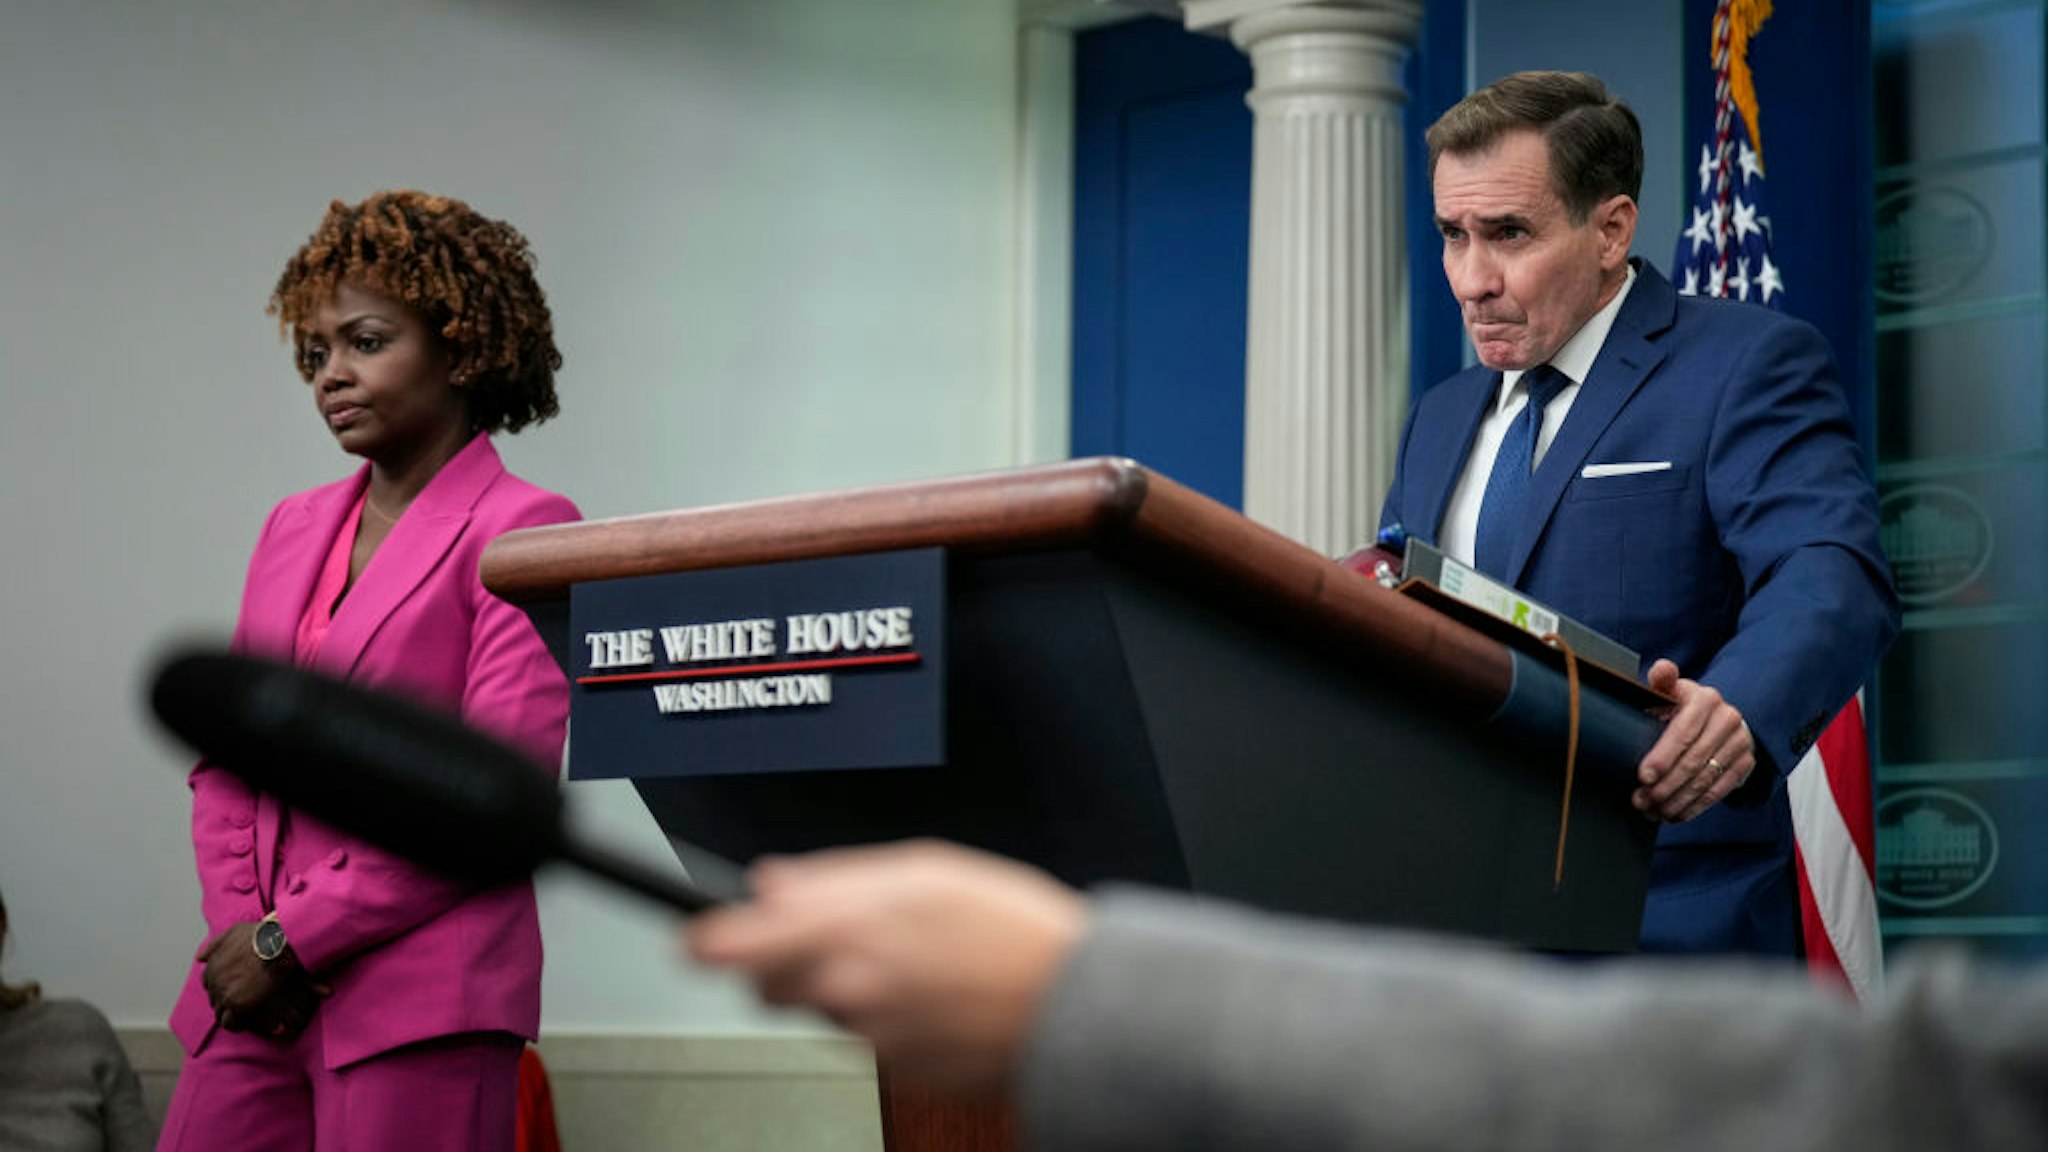 WASHINGTON, DC - JANUARY 6: (L-R) White House Press Secretary Karine Jean-Pierre and Coordinator for Strategic Communications at the National Security Council John Kirby take questions during the daily press briefing at the White House January 6, 2023 in Washington, DC. Jean-Pierre and Kirby discussed the conflict in Ukraine and President Biden's upcoming trip to the U.S.-Mexico border. (Photo by Drew Angerer/Getty Images)